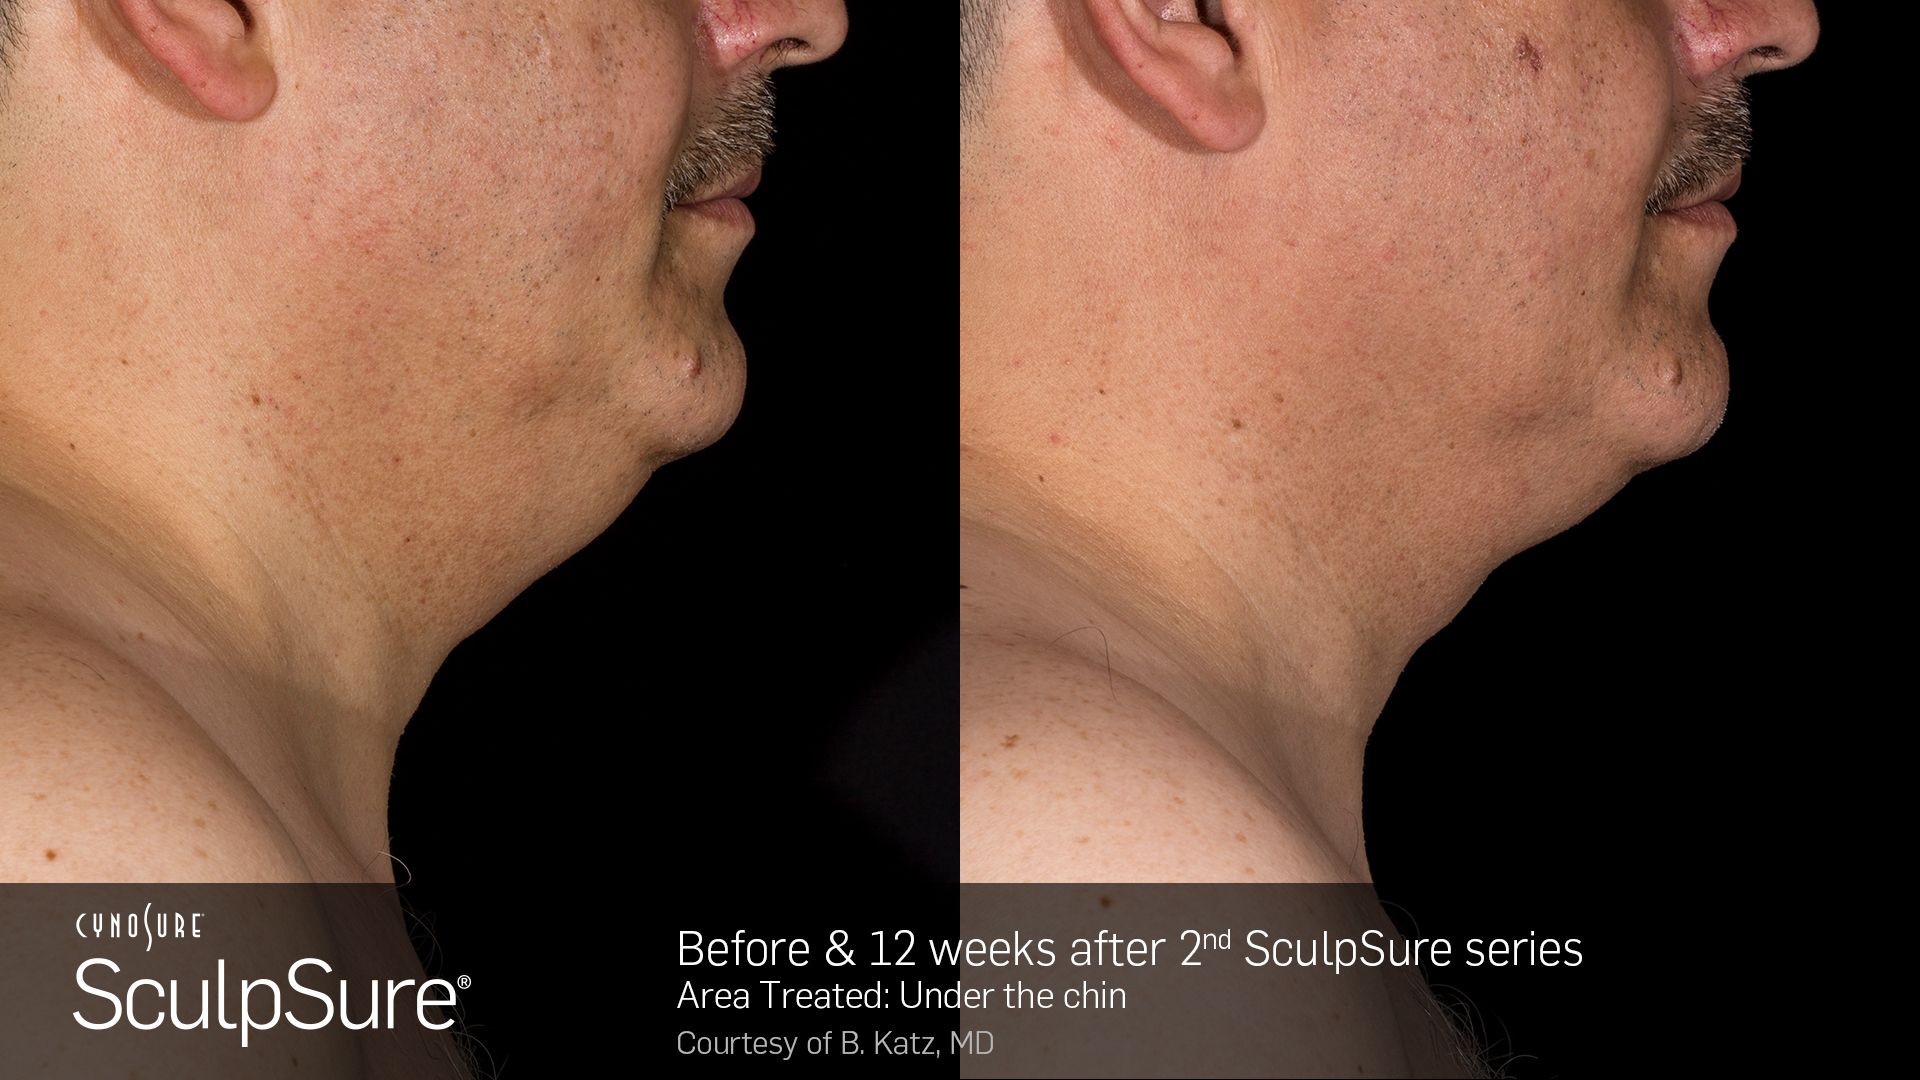 Sculpsure® Submental Before And After Photos Gallery Dr Kohn